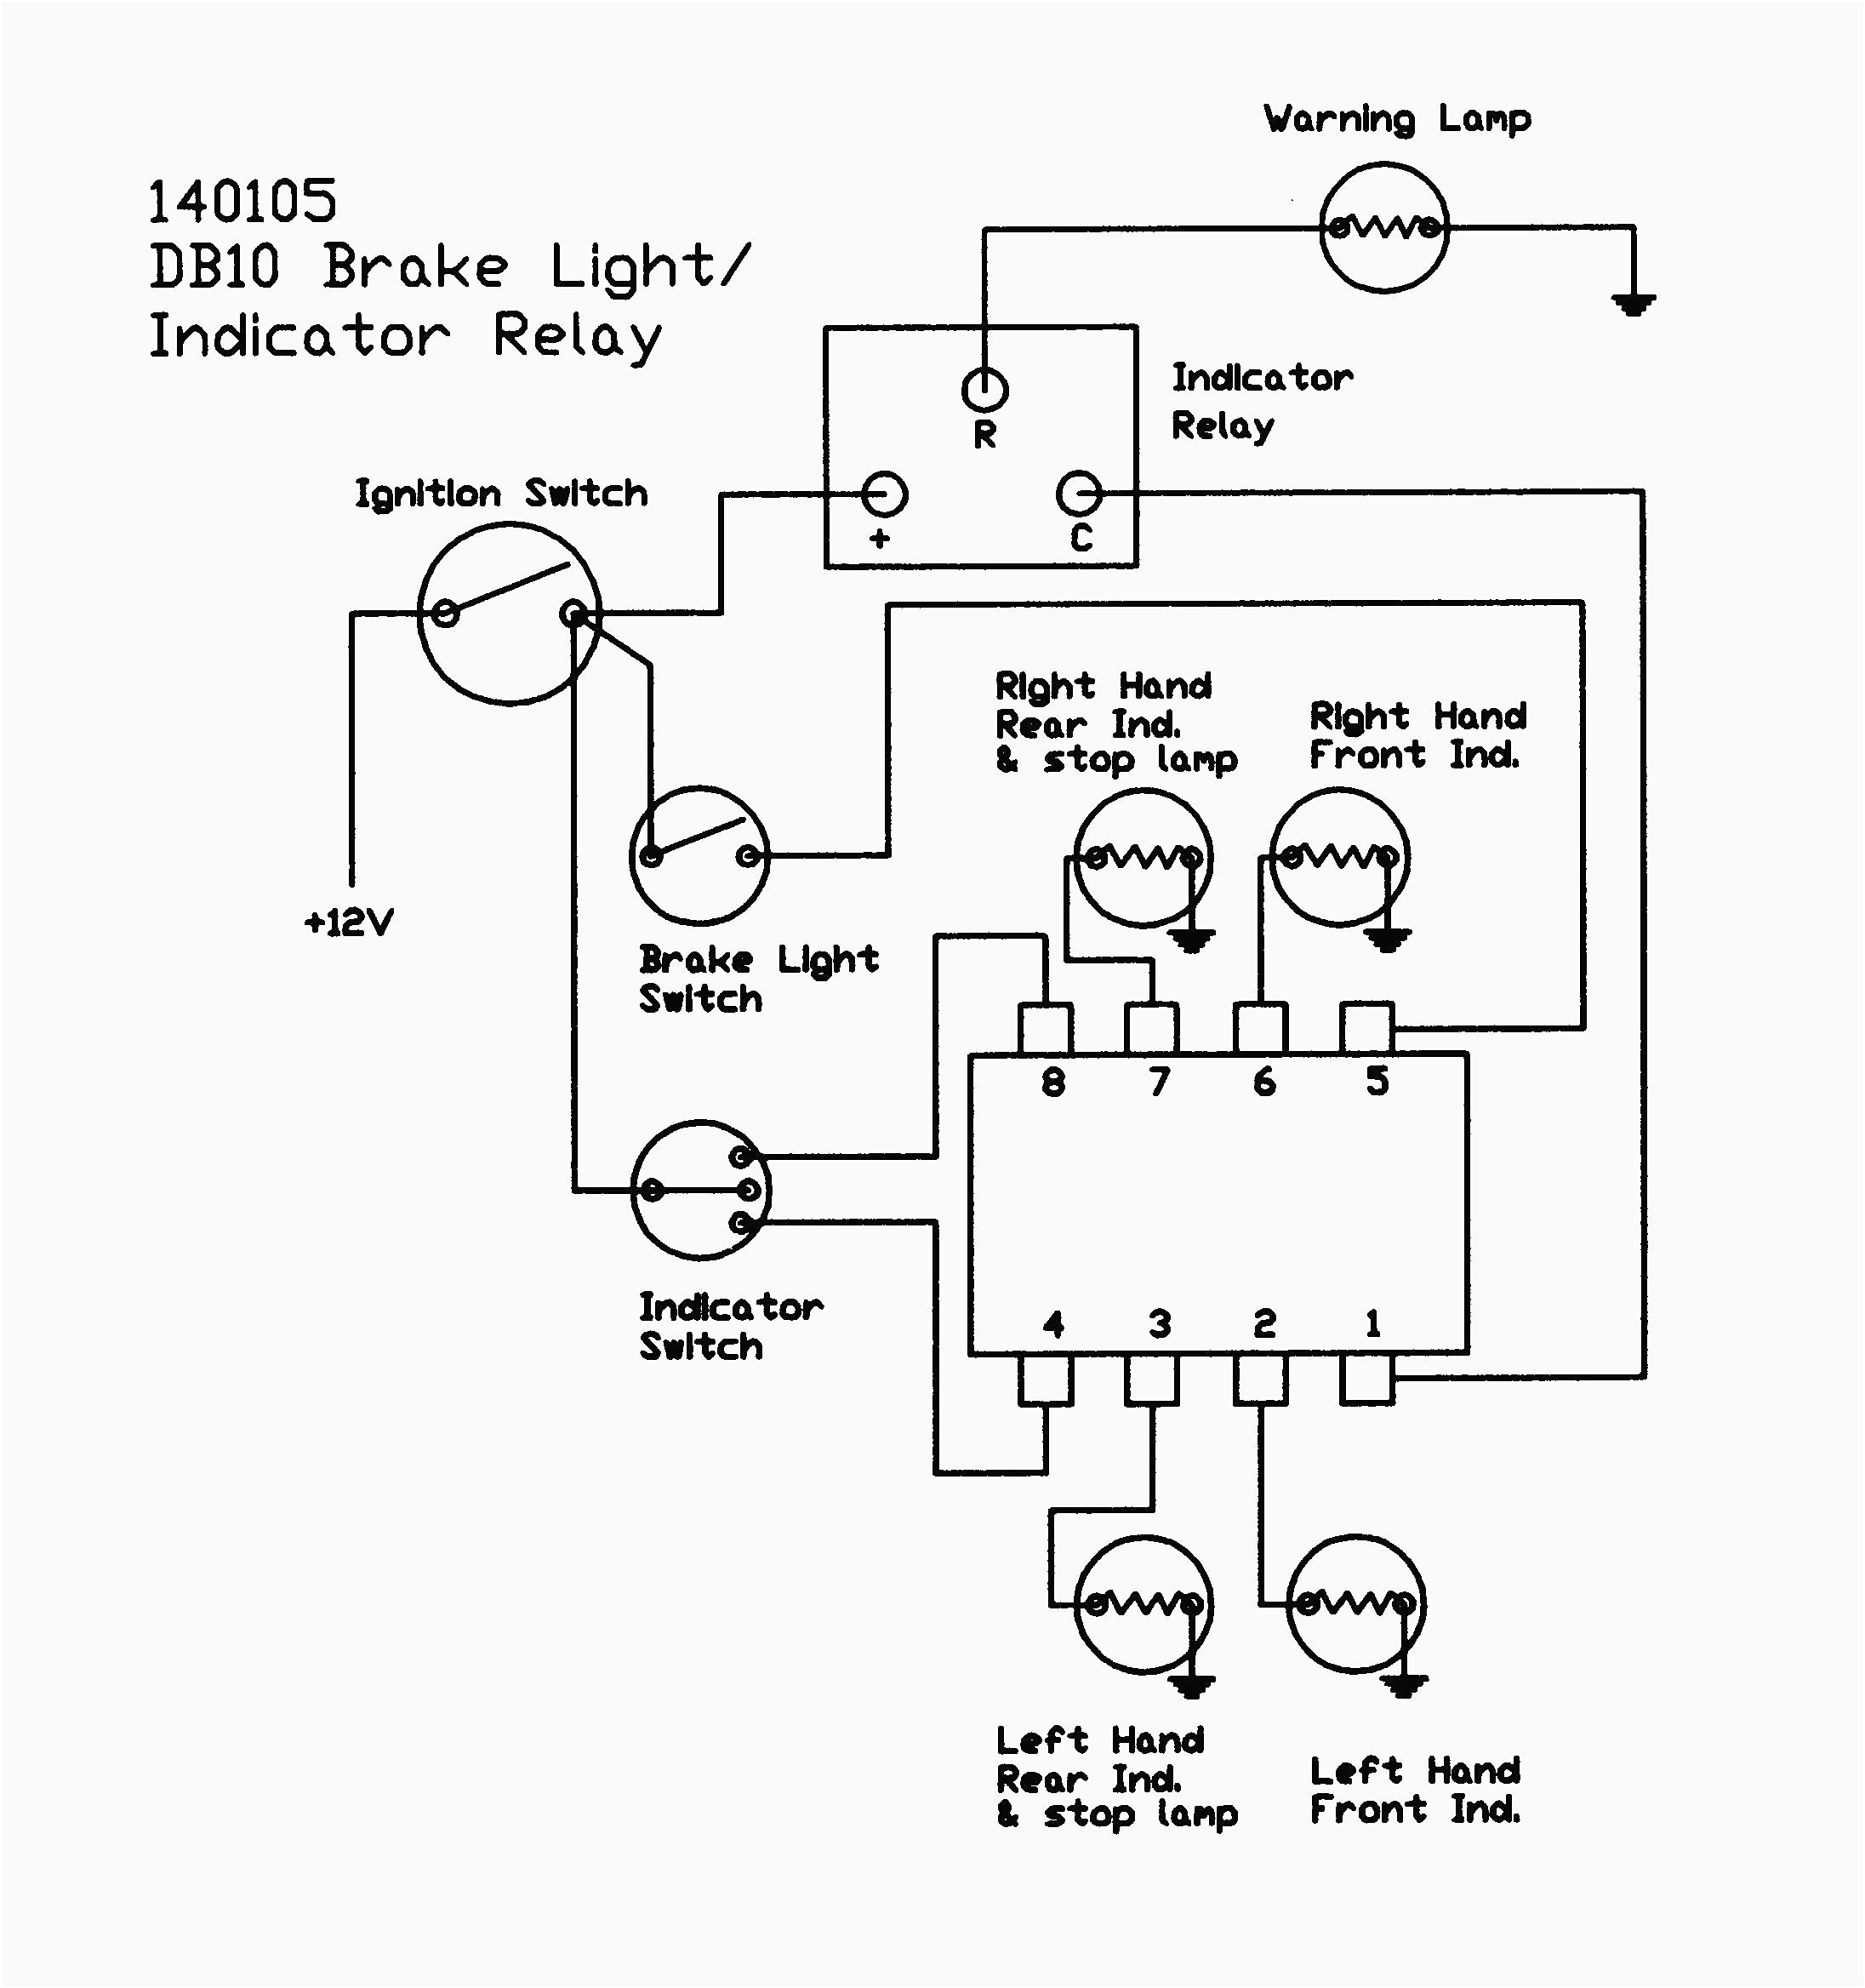 Flasher Relay Wiring Diagram 1 with 2 Pin Flasher Relay Wiring Diagram Wiring Diagram Of Flasher Relay Wiring Diagram